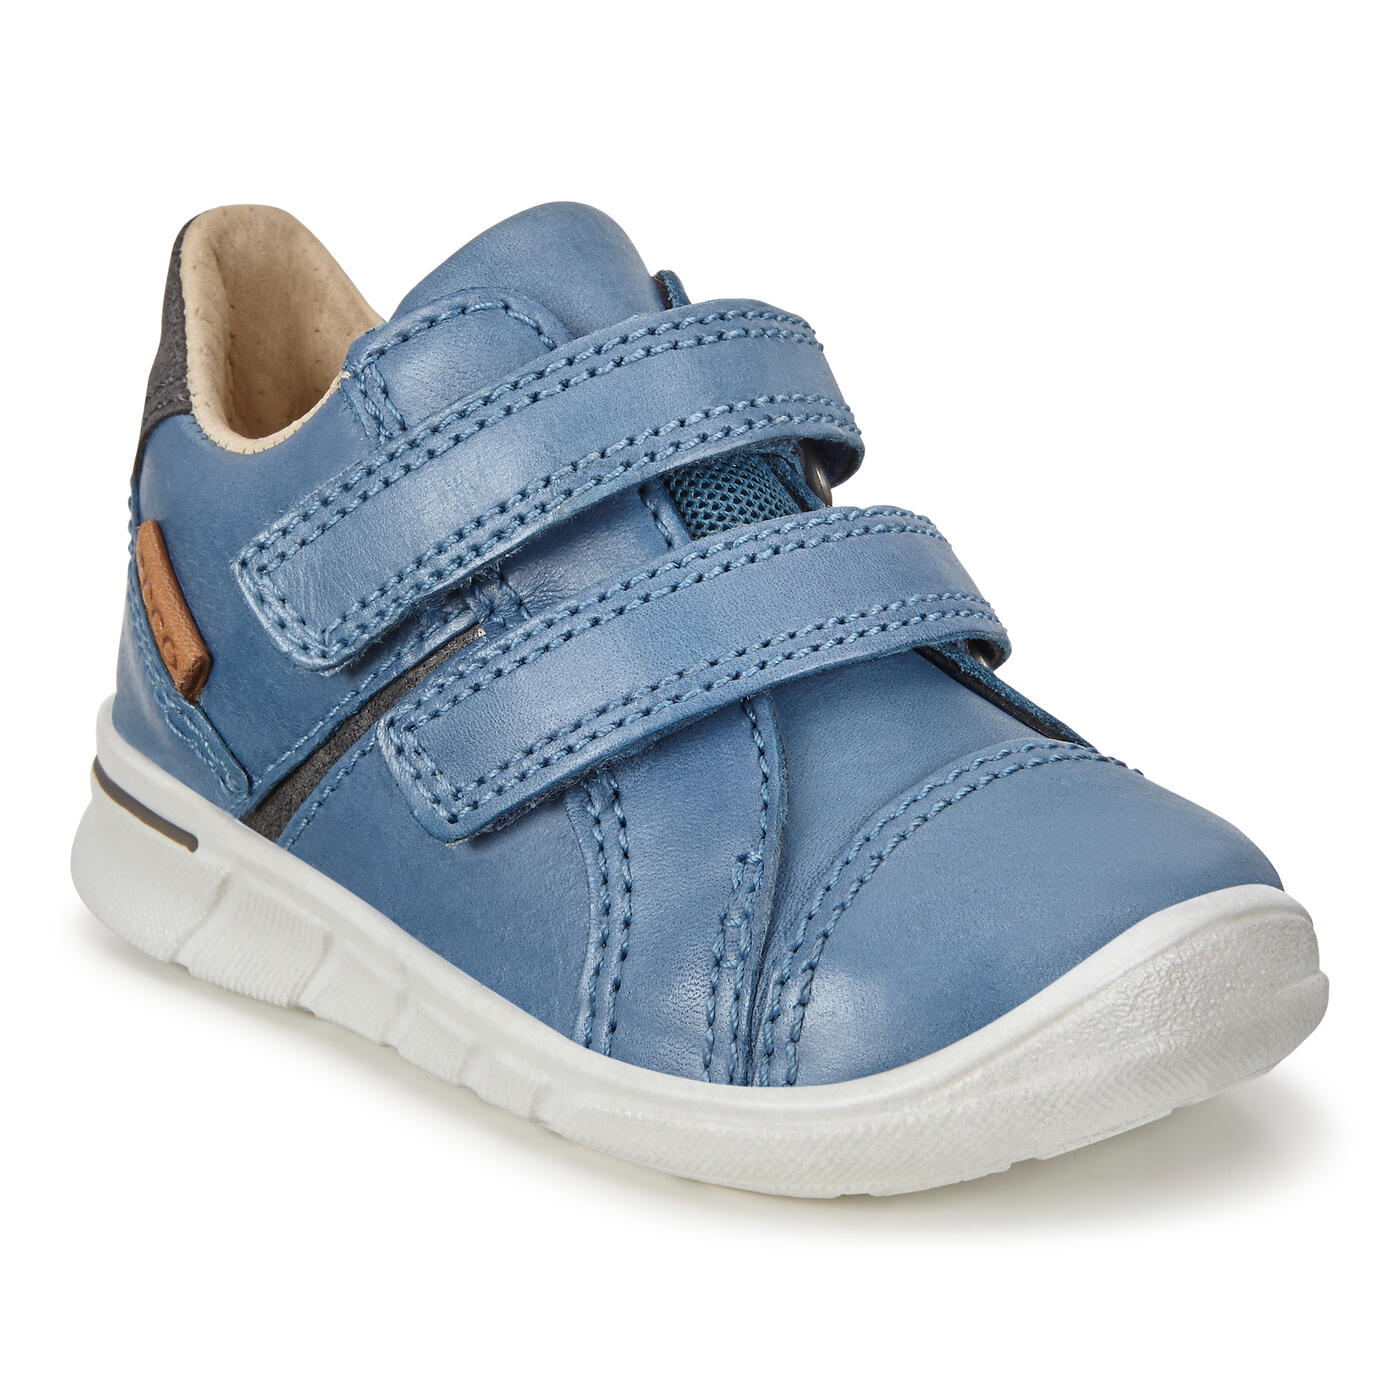 ECCO First kids shoes | Official ECCO® Shoes